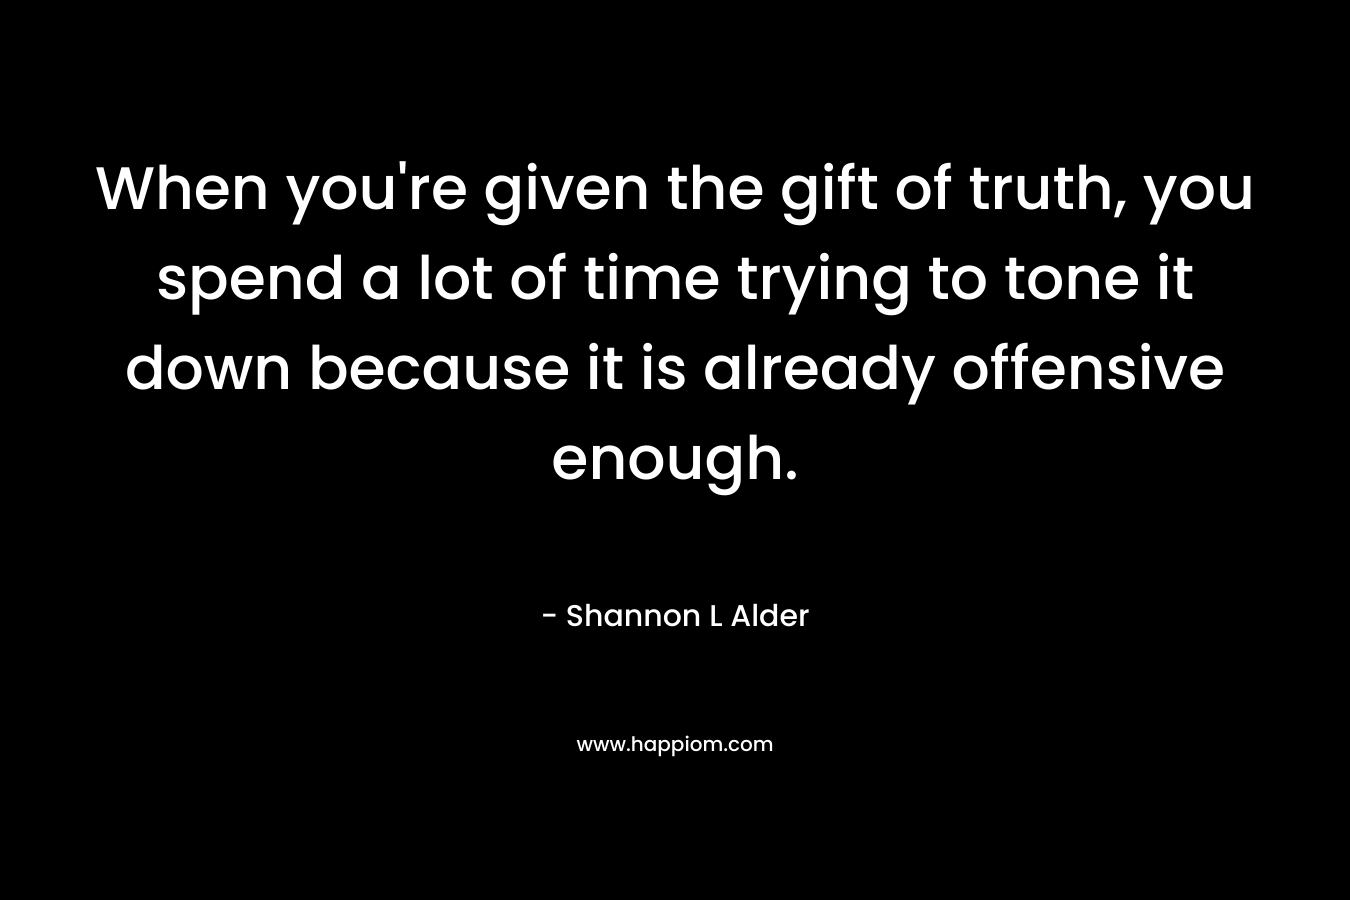 When you're given the gift of truth, you spend a lot of time trying to tone it down because it is already offensive enough.